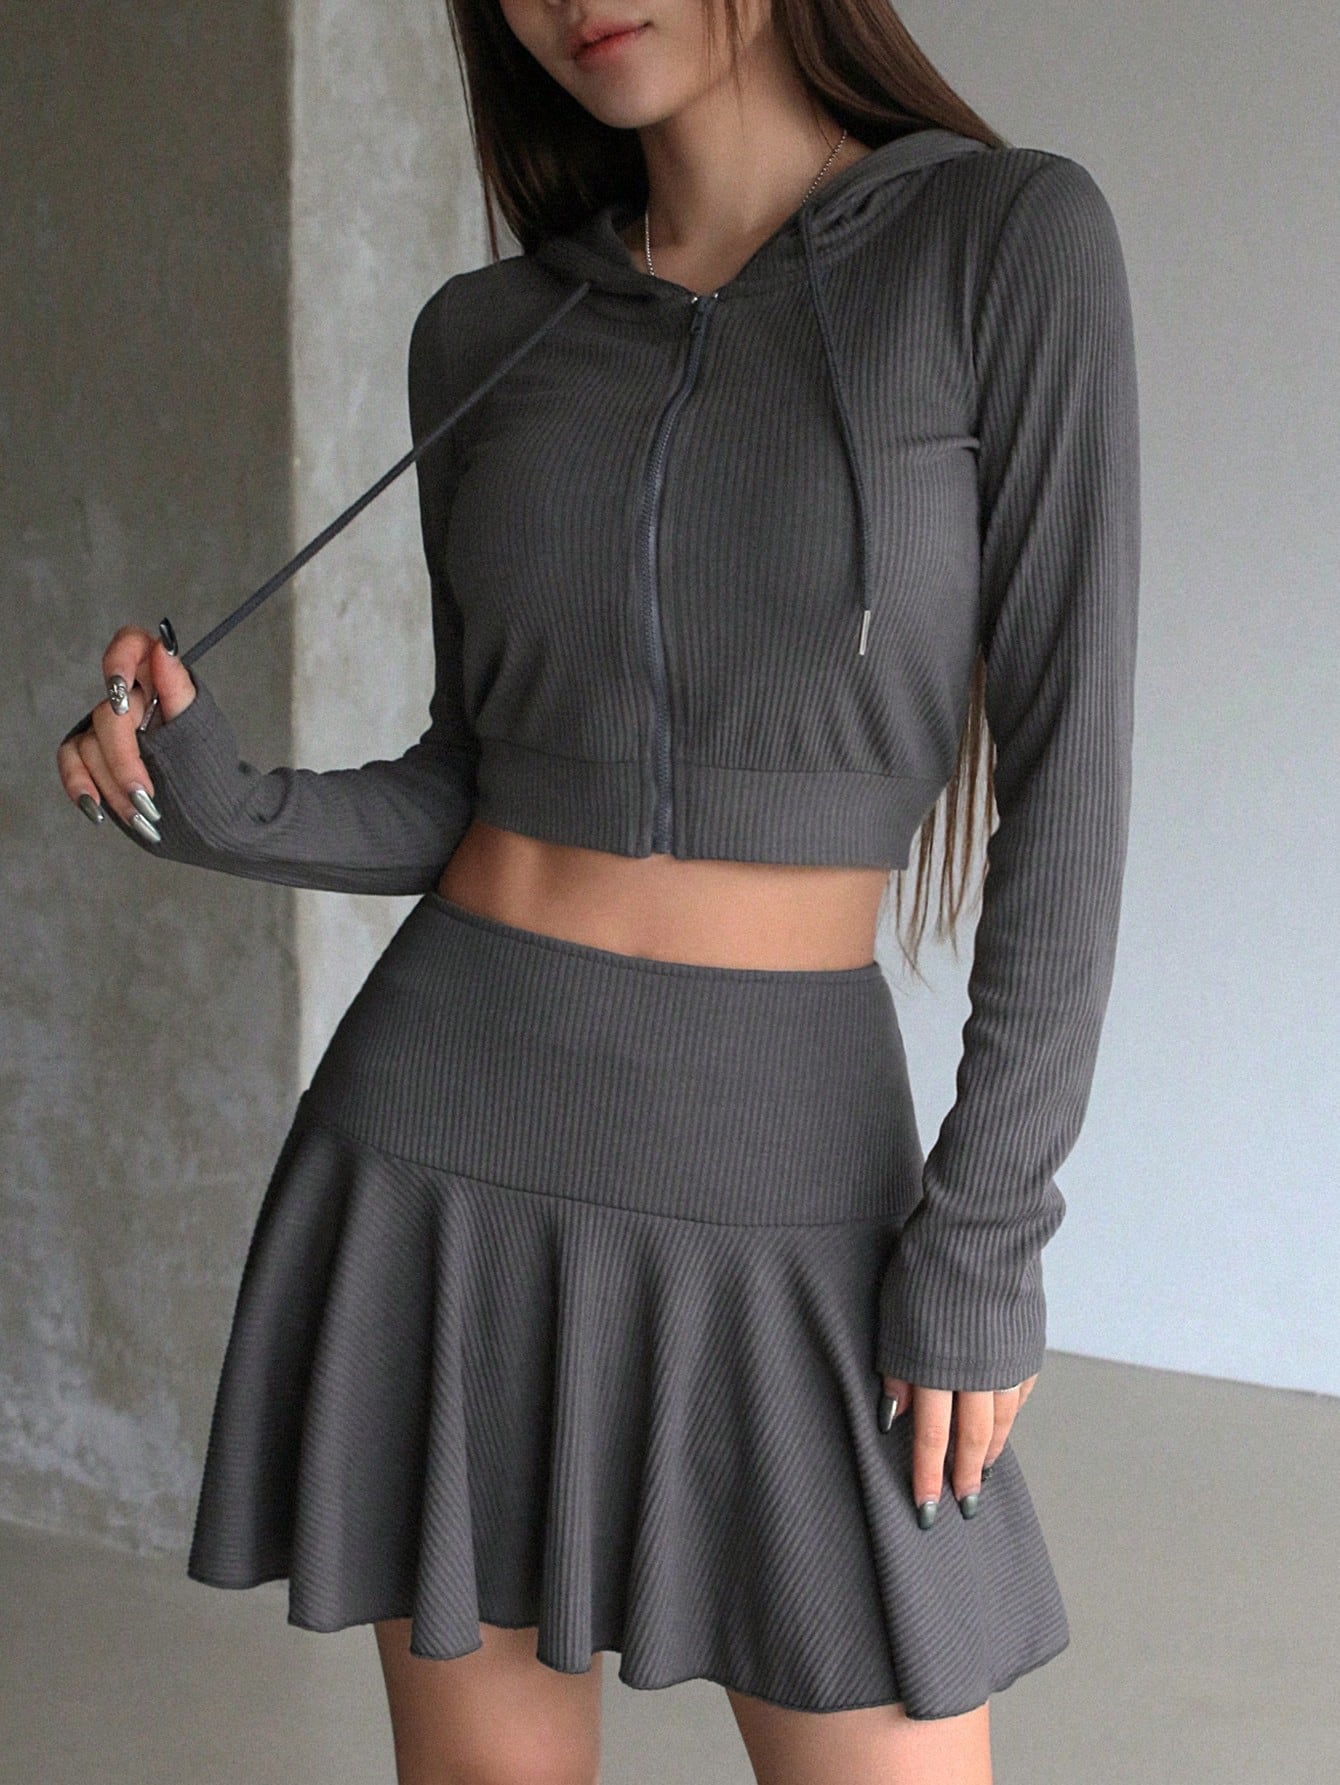 Solid Color Zipper Front Hooded Sweatshirt And Skirt With Drawstring